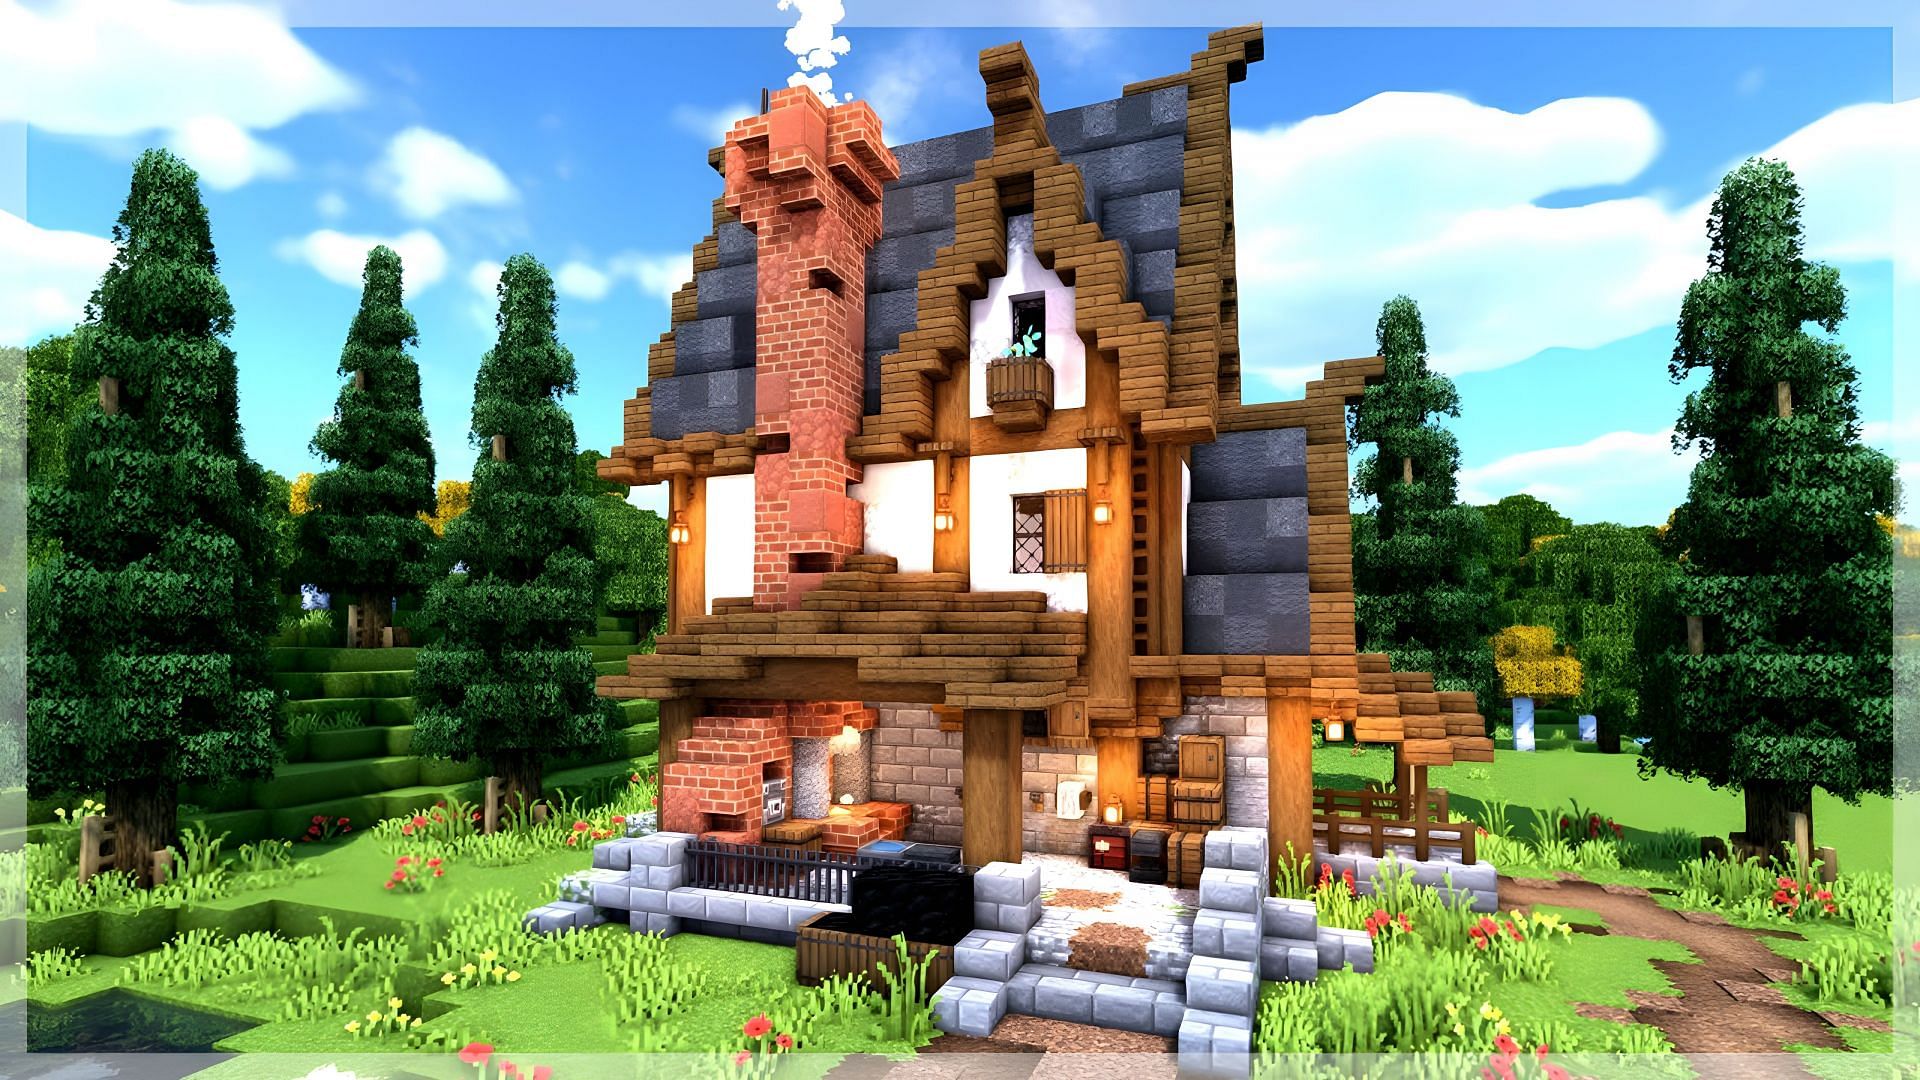 Taverns are often aesthetic and cute builds in Minecraft (Image via Youtube/BlueNerd)